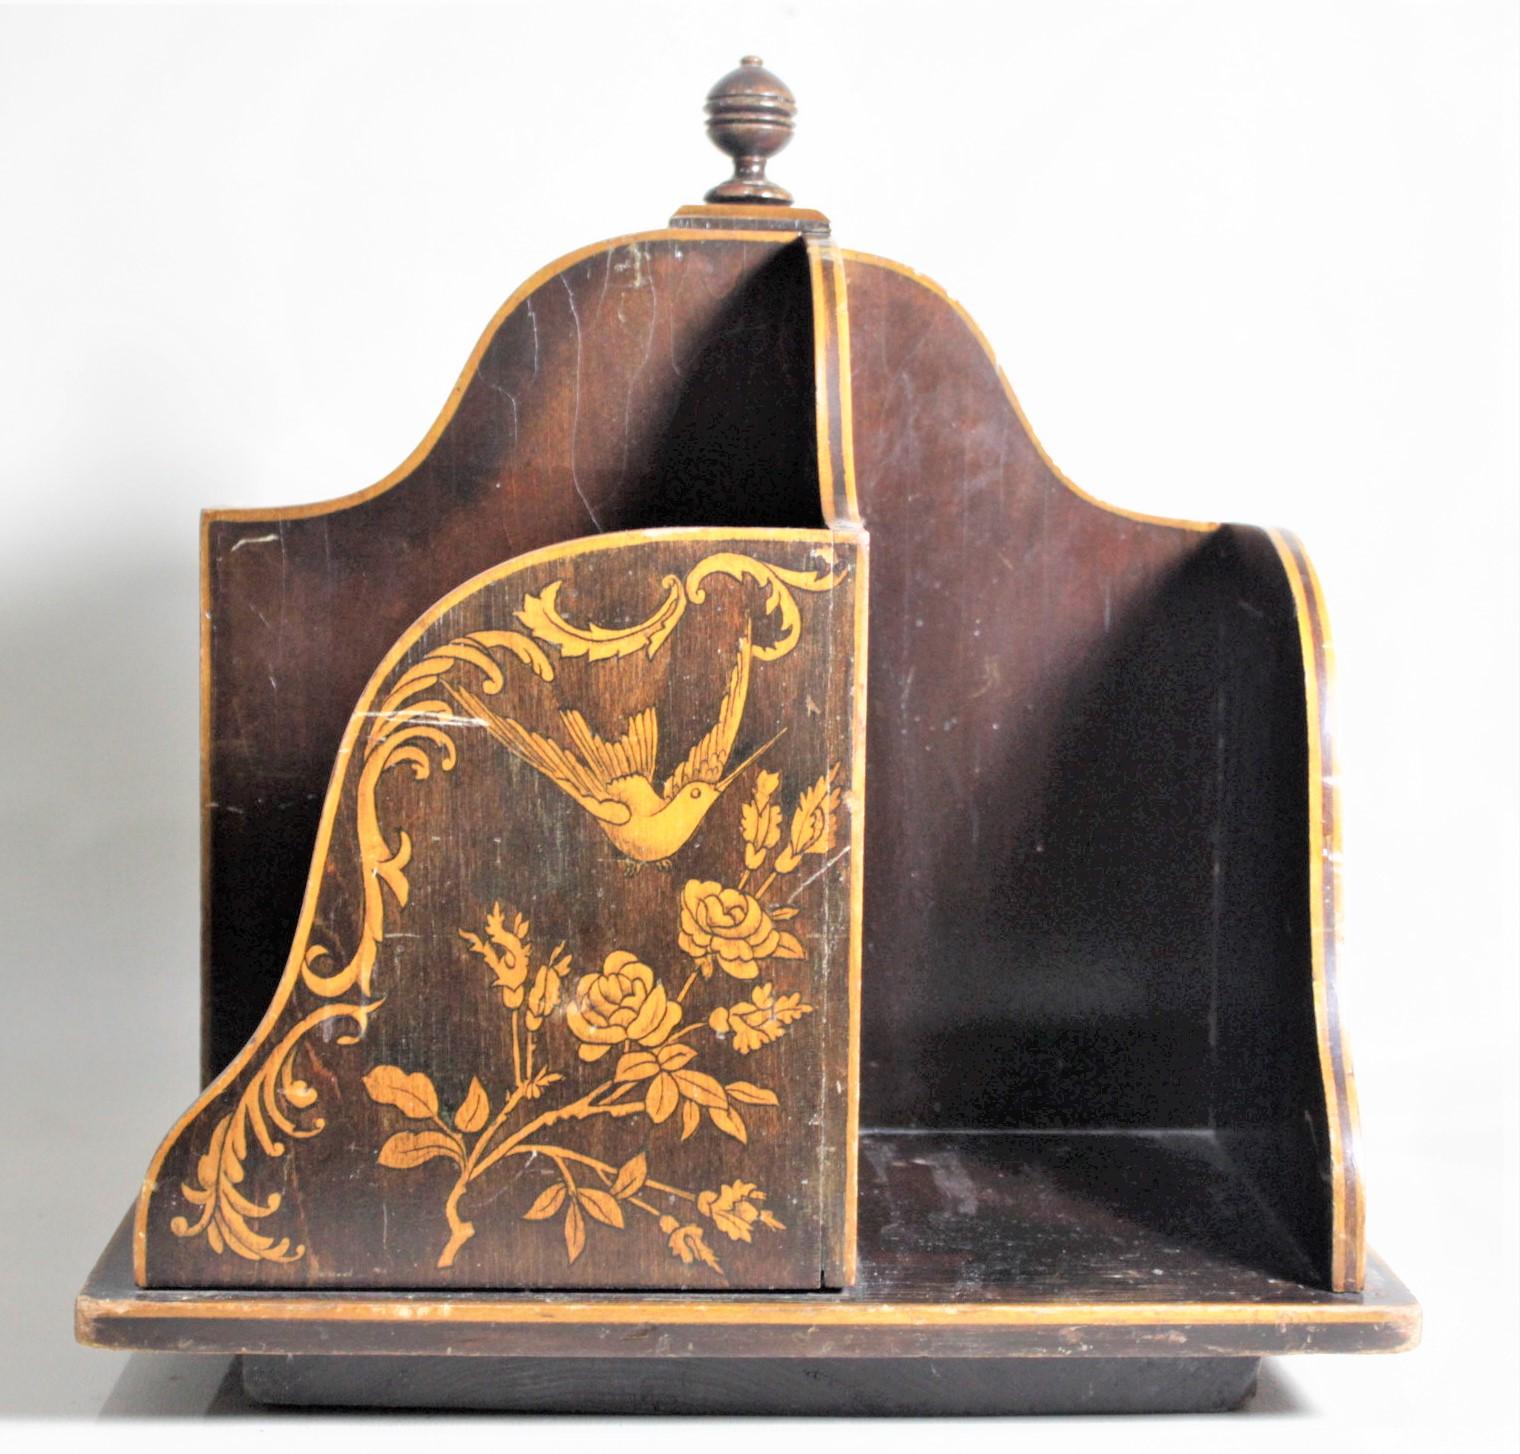 English Antique Wooden Book Mill or Rotating Desk Bookcase with Flower & Bird Decoration